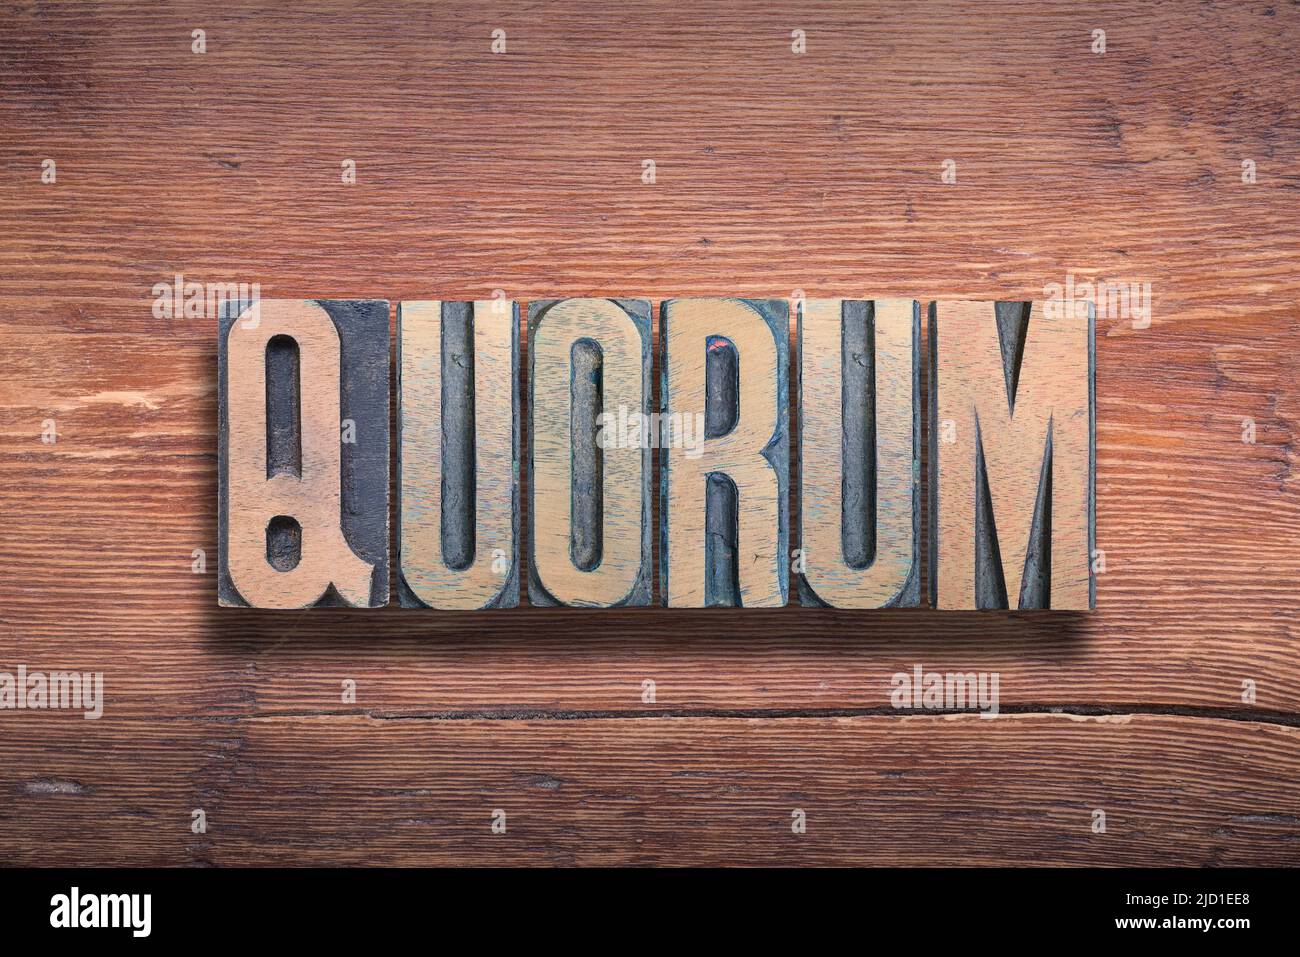 quorum ancient Latin word meaning - of whom; the number of members whose presence is required, combined on vintage varnished wooden surface Stock Photo